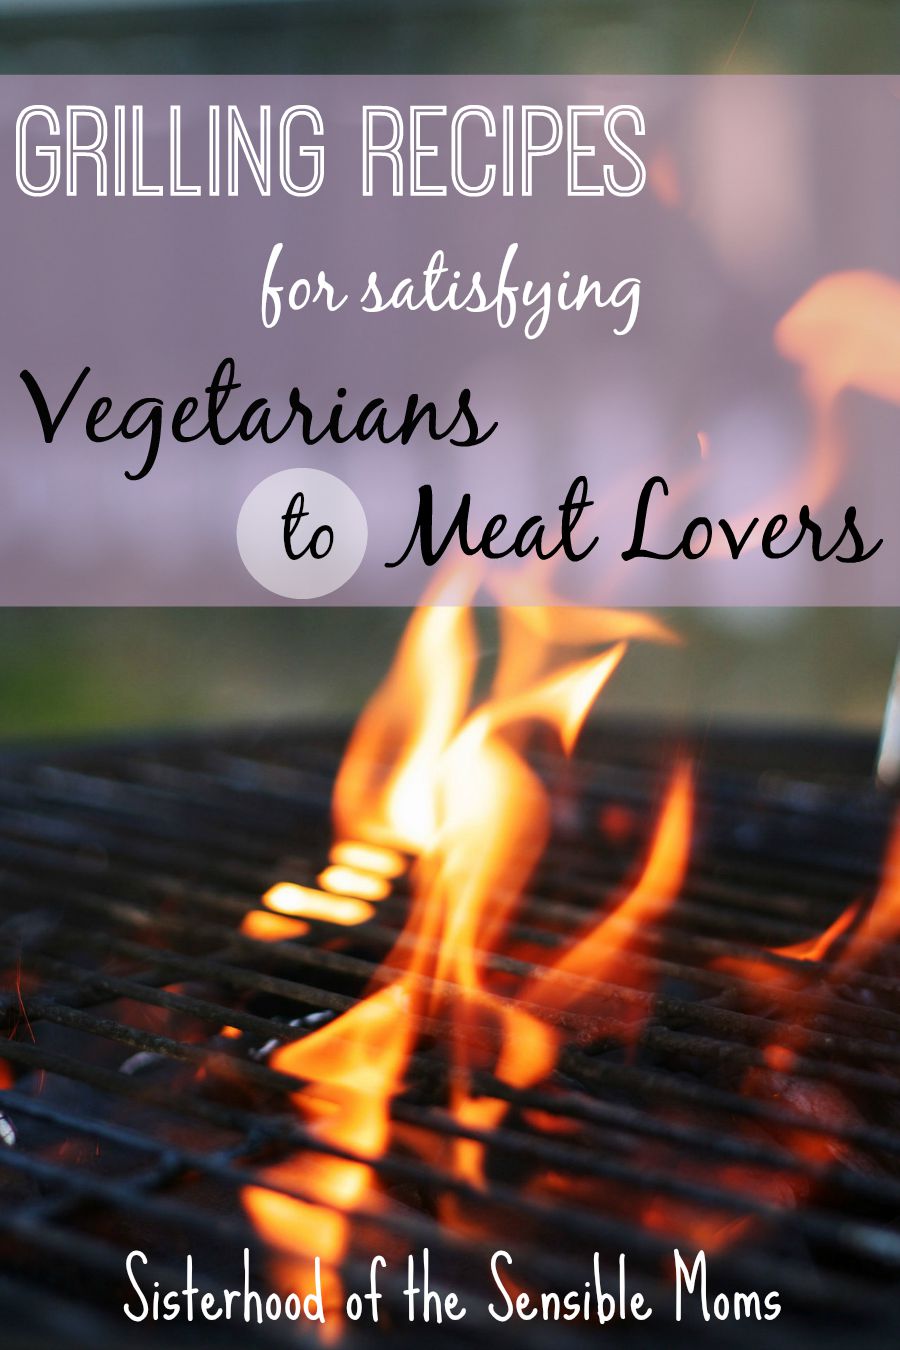 Hearty, healthy grilling recipes to cook for dinner tonight to satisfy vegetarians to meat lovers: Black Bean Burgers, Turkey Burgers, and London Broil. | Sisterhood of the Sensible Moms